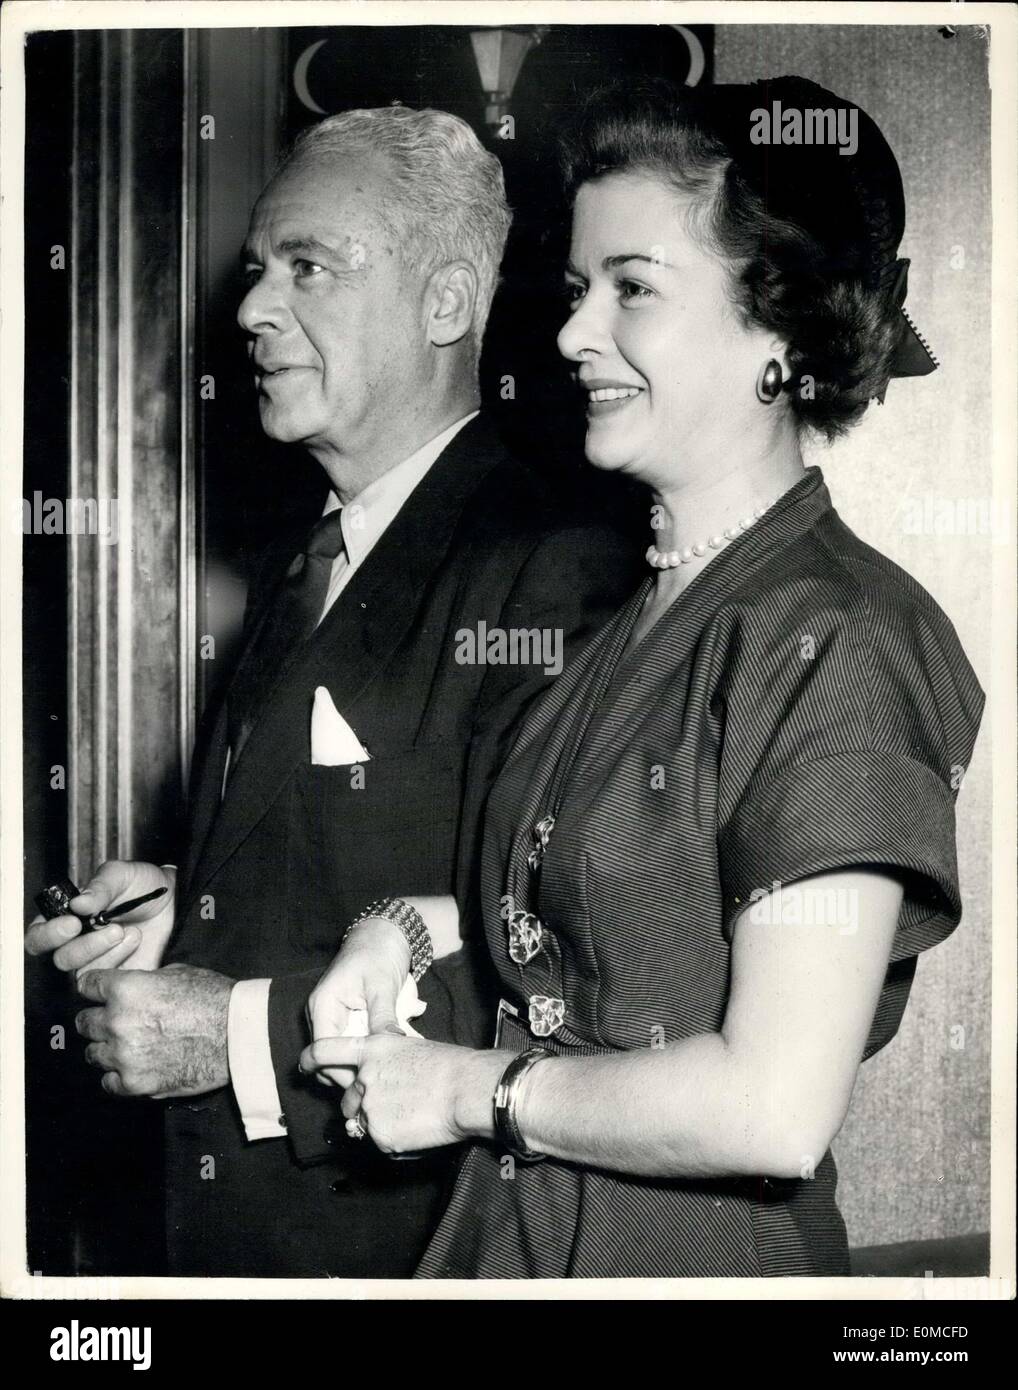 Aug. 21, 1954 - Actress Joan Bennett And Husband Walter Wanger Arrive In London.: Film producer Walter Wanger and his wife, actress Joan Bennett arrived in London today by air. It is their first visit together since he shot and wounded her hollywood agent Jennings Lang three years ago. After the shooting they separated. Now Happily reunited they will go to the Edinburgh Film Festival for the showing of Wanger's film ''Cell Block 11''. It grew out of his own term in prison for the shooting Stock Photo